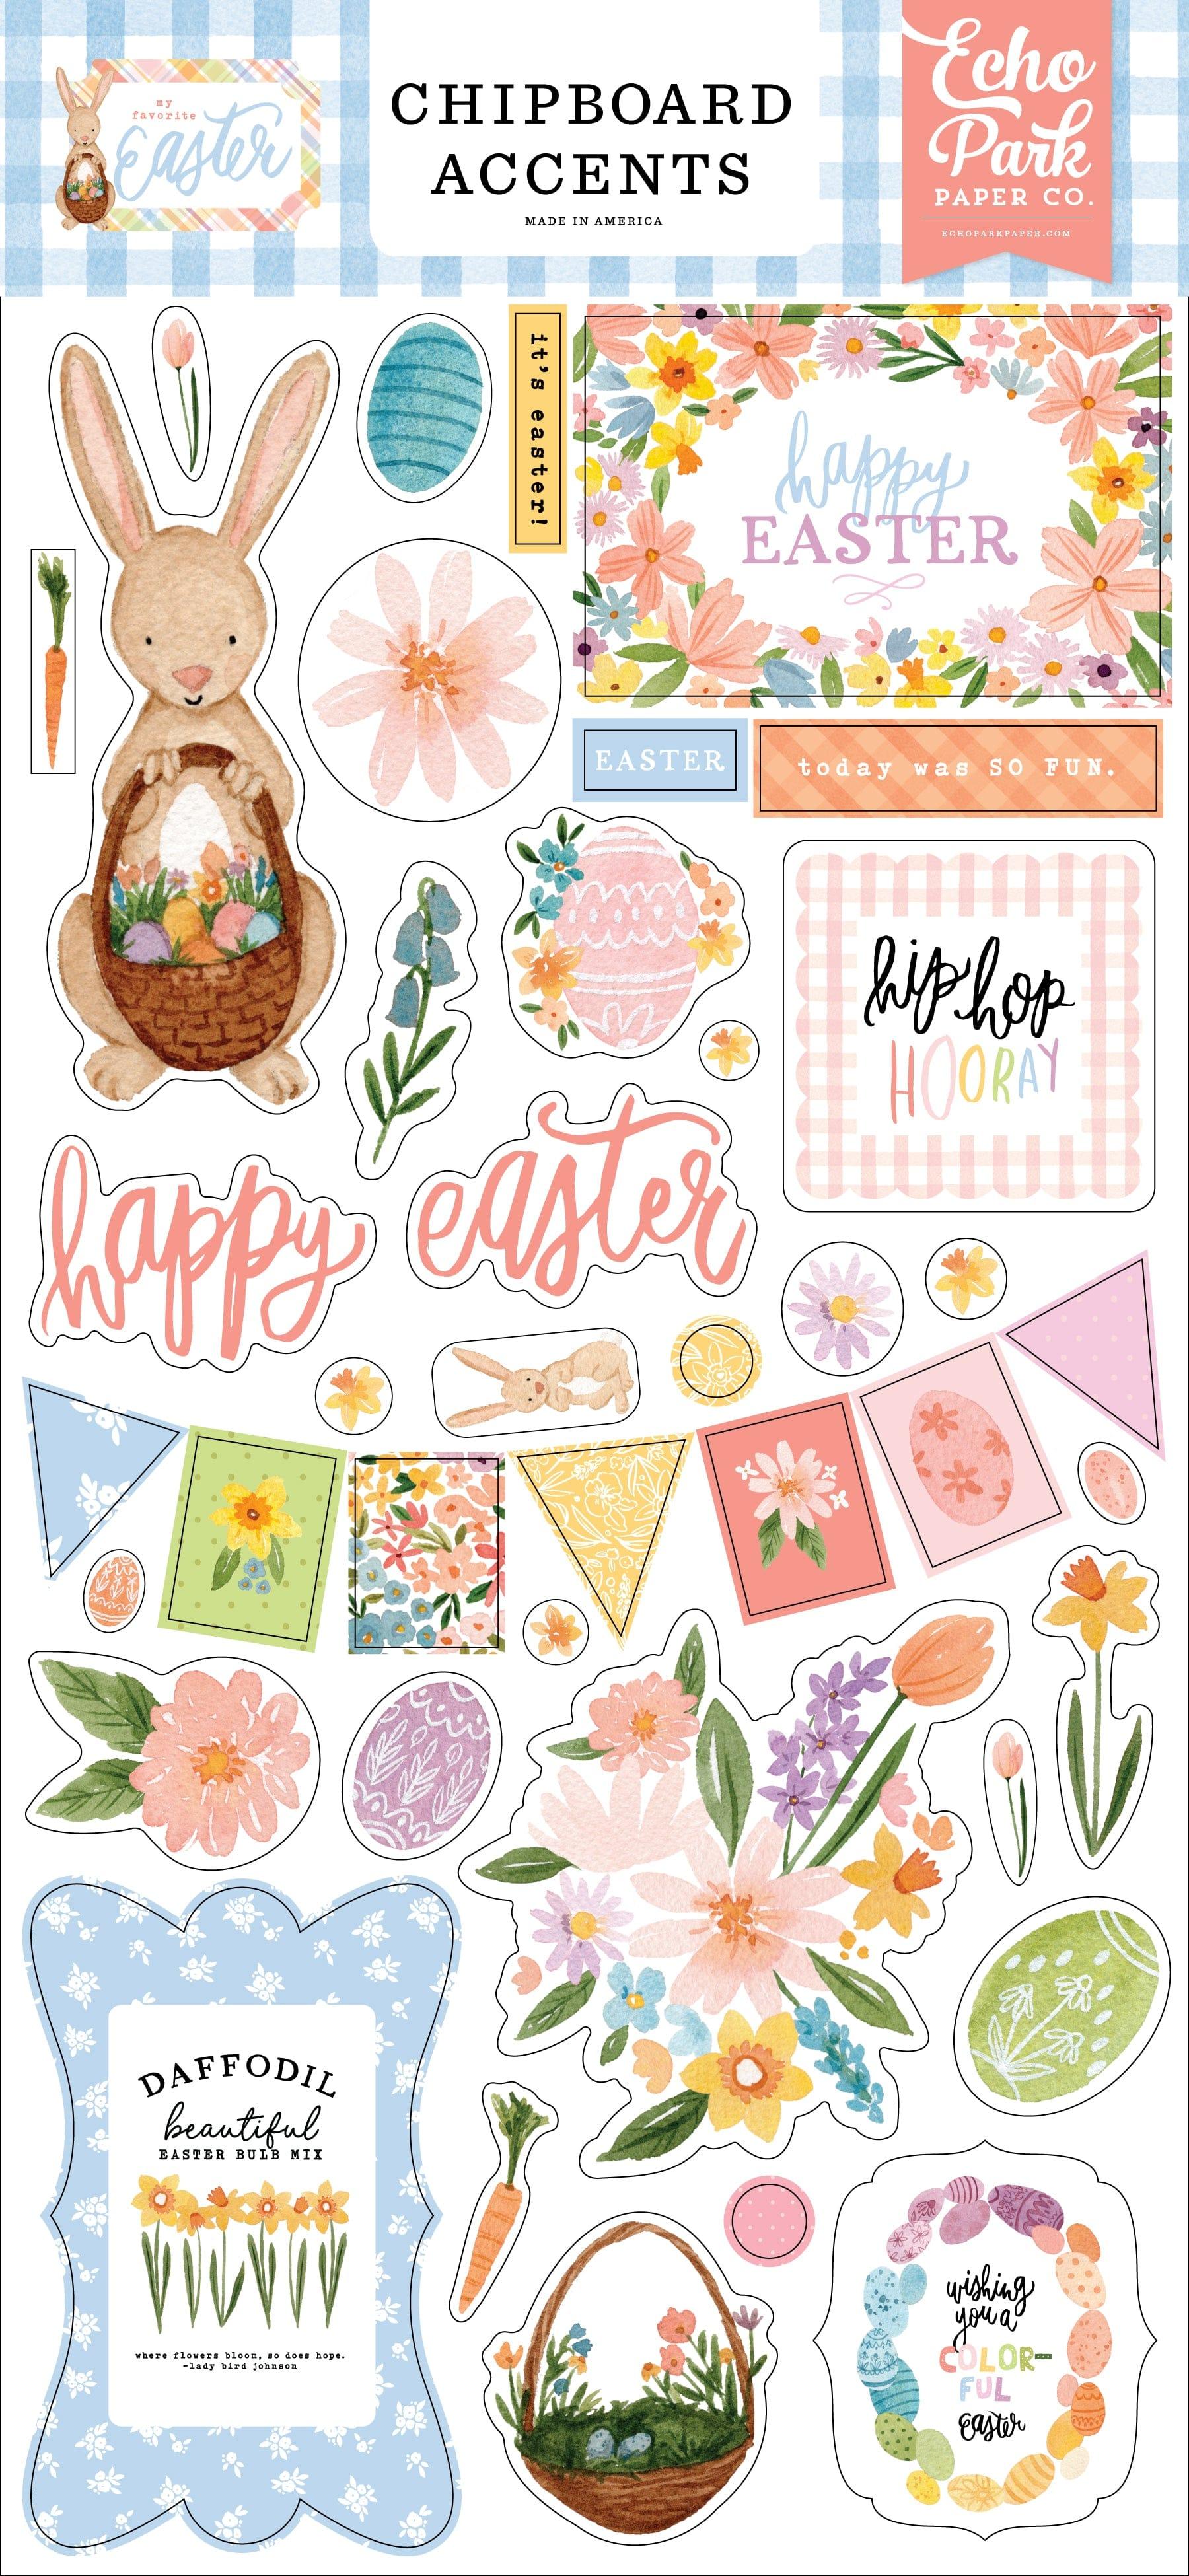 My Favorite Easter Collection 6 x 12 Scrapbook Chipboard Accents by Echo Park Paper - Scrapbook Supply Companies